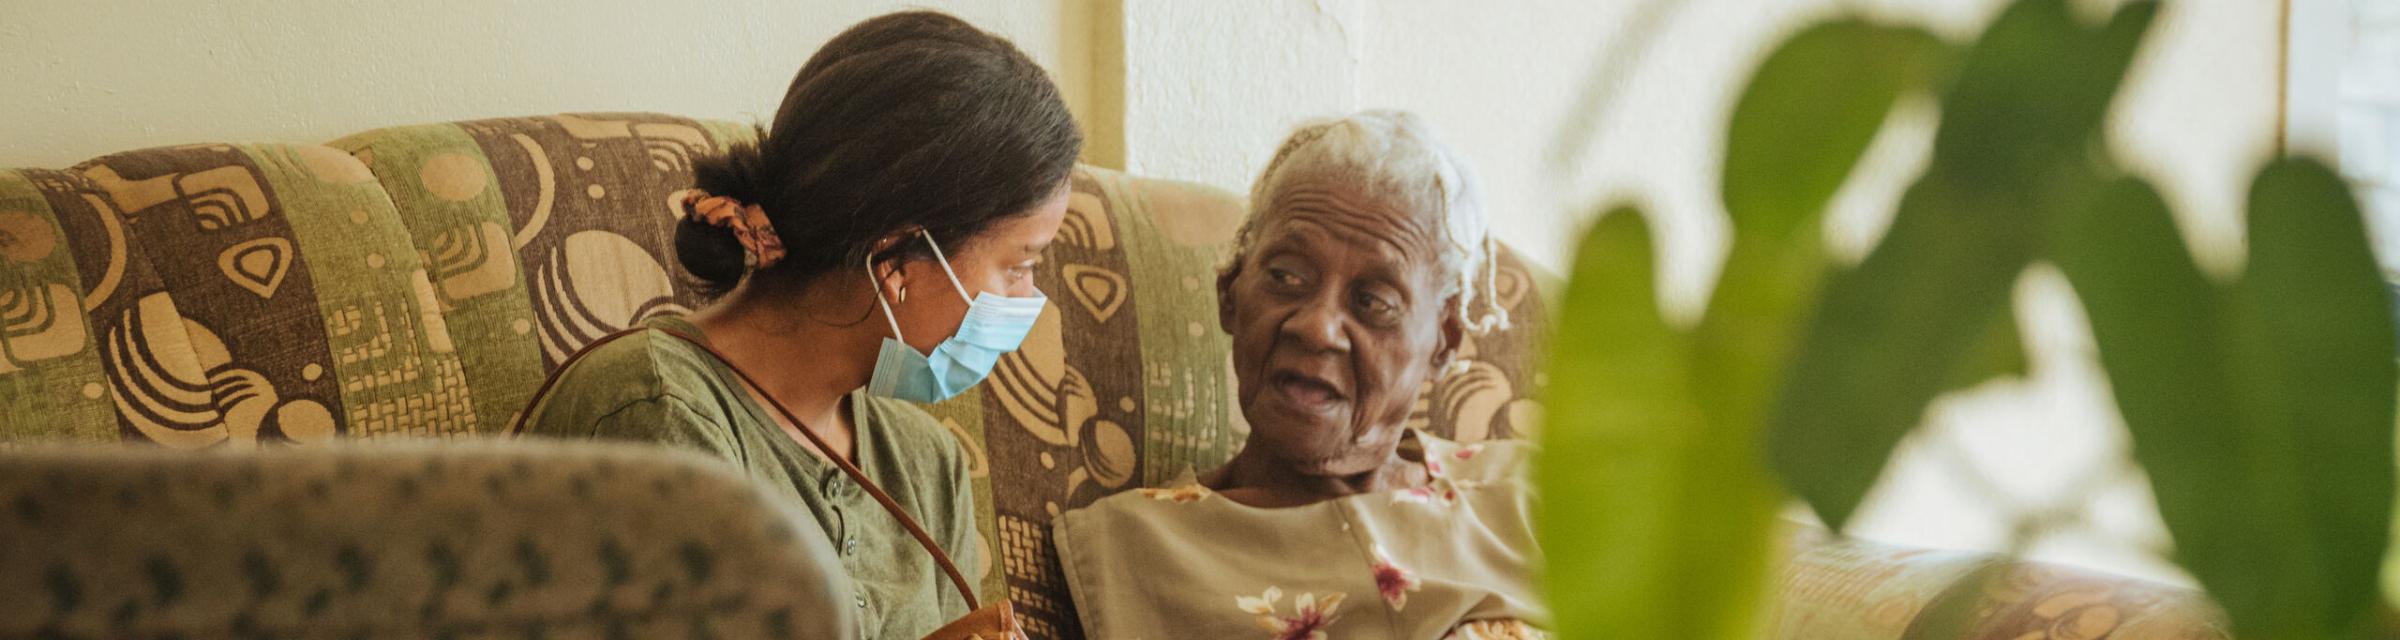 Castries, Saint Lucia :: Jessica Campos (El Salvador) talking with an elderly woman in a shelter.